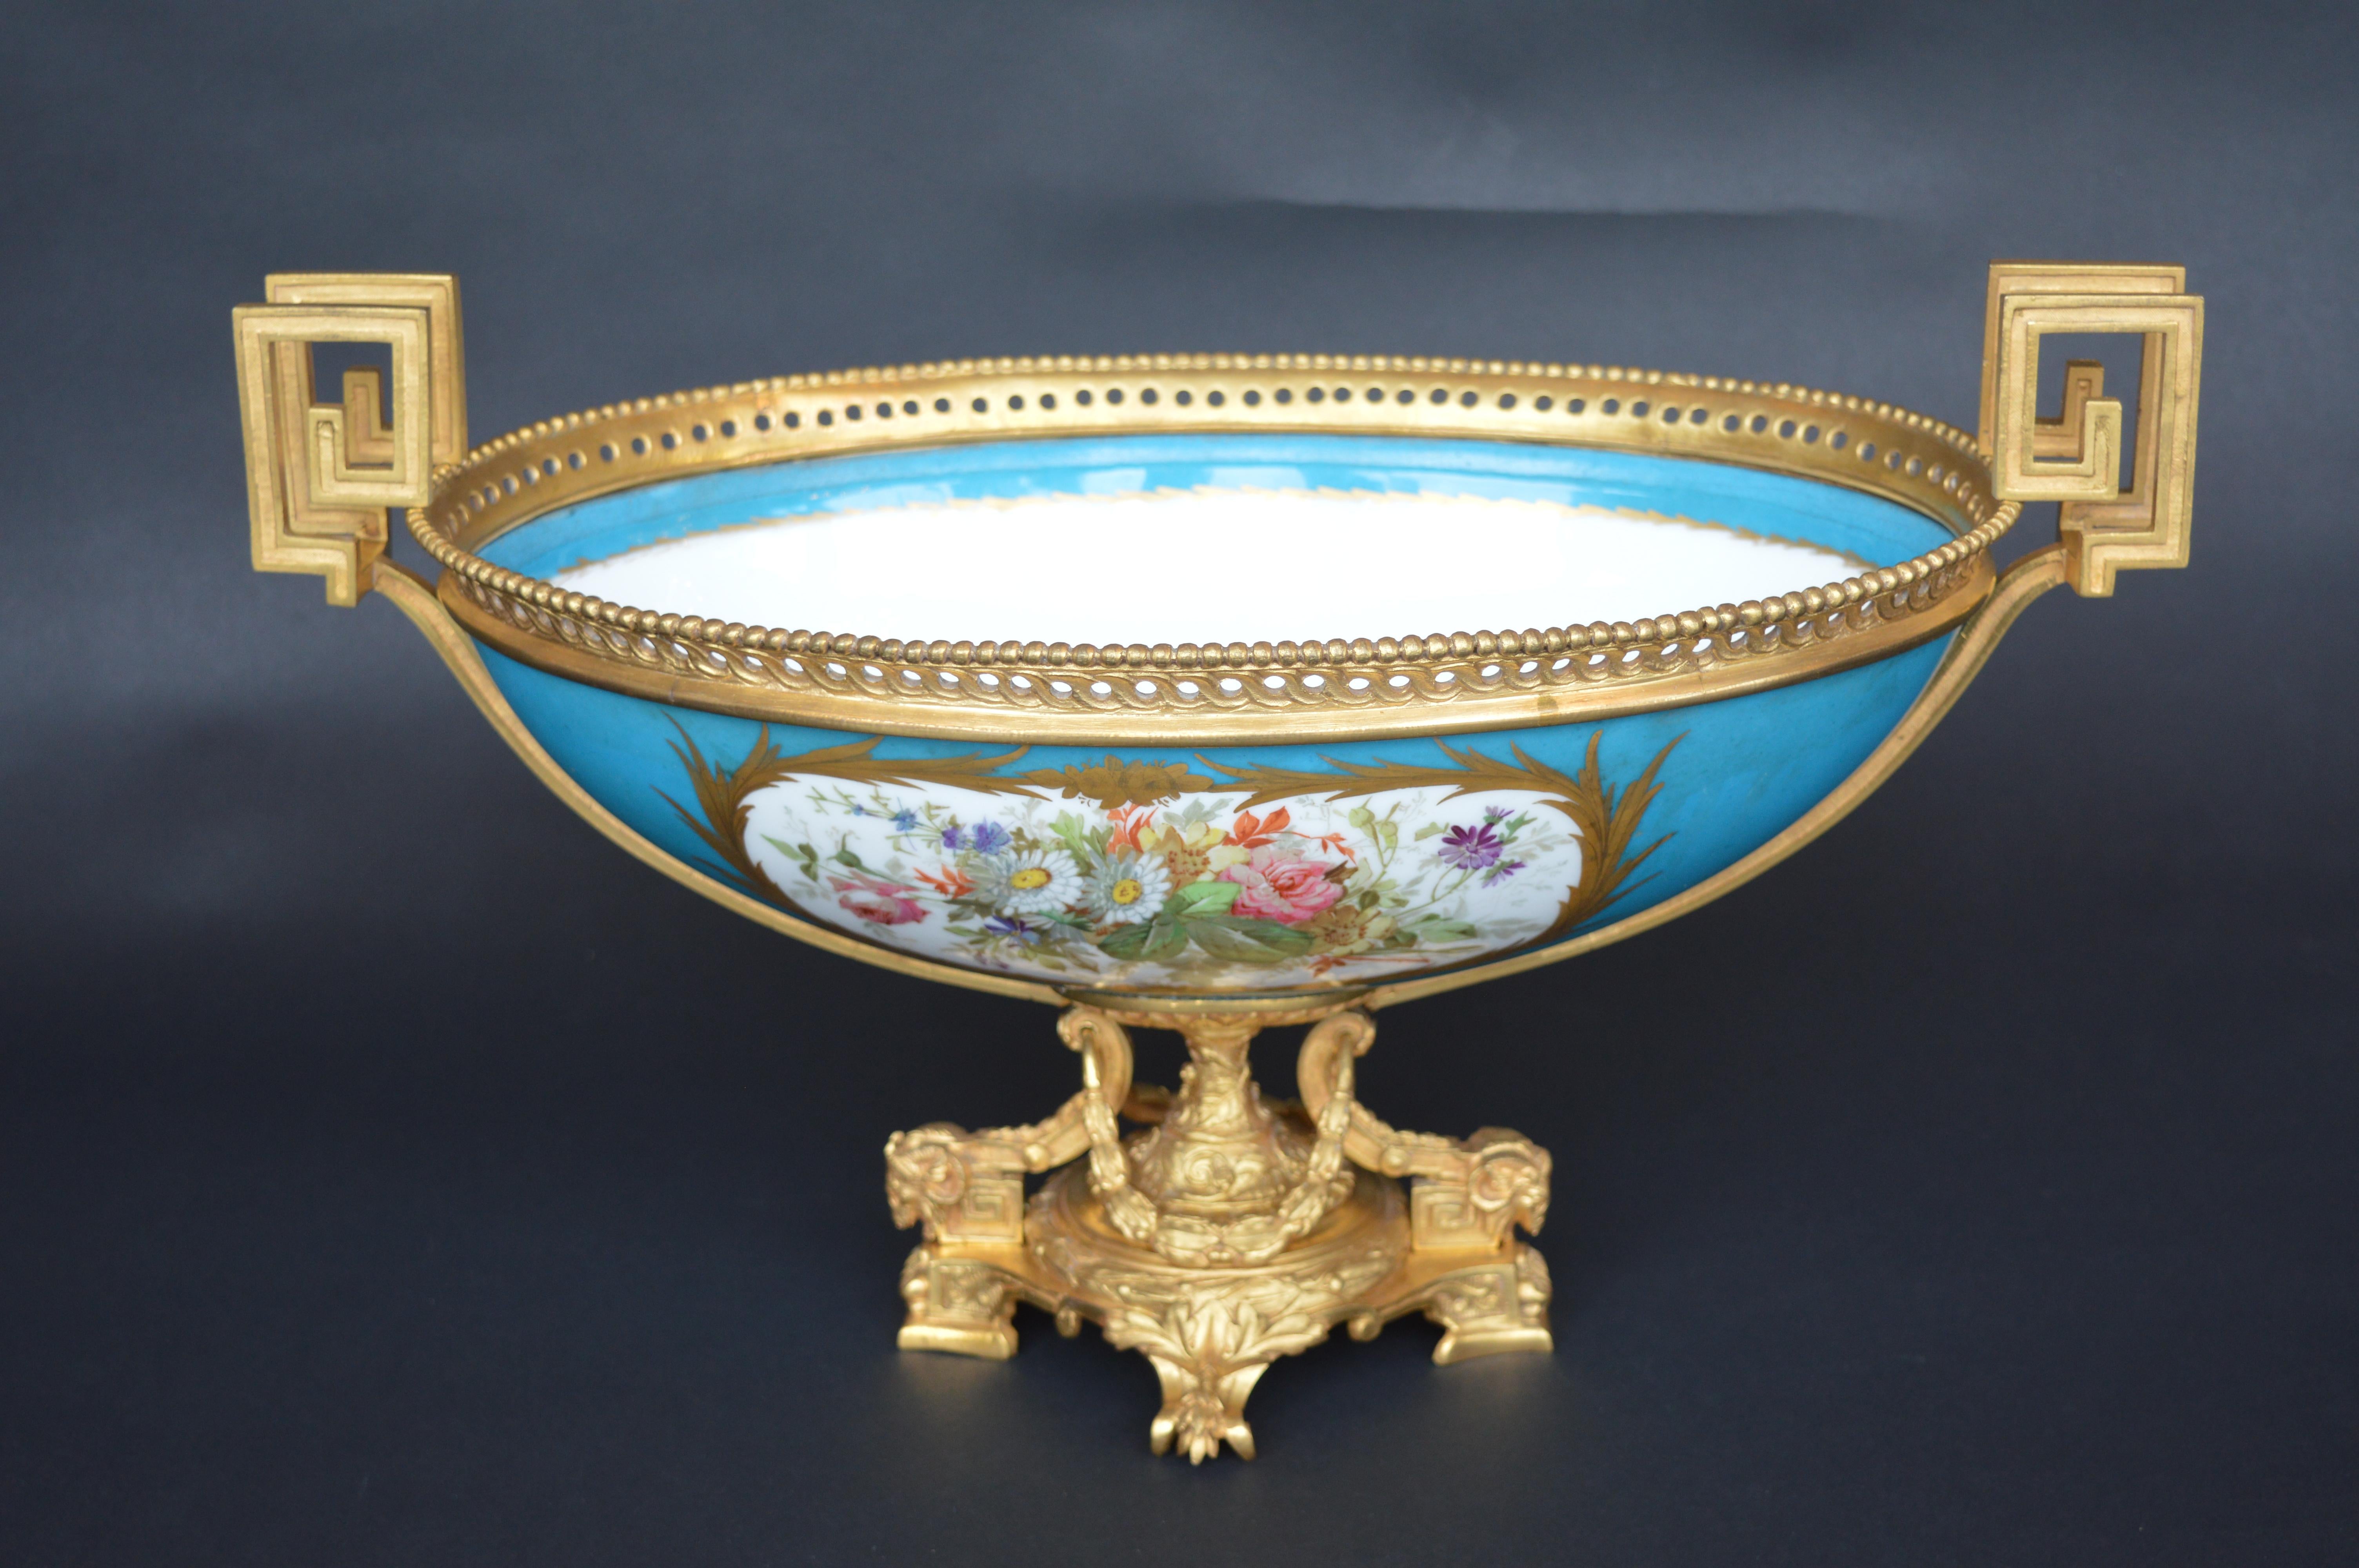 A sèvres style parcel-gilt ormolu-mounted enameled blue celeste porcelain center bowl, last quarter of the 19th century, the rim mounted with bead and reticulated guilloche motif, over reserves, one painted with a Native American hunt scene